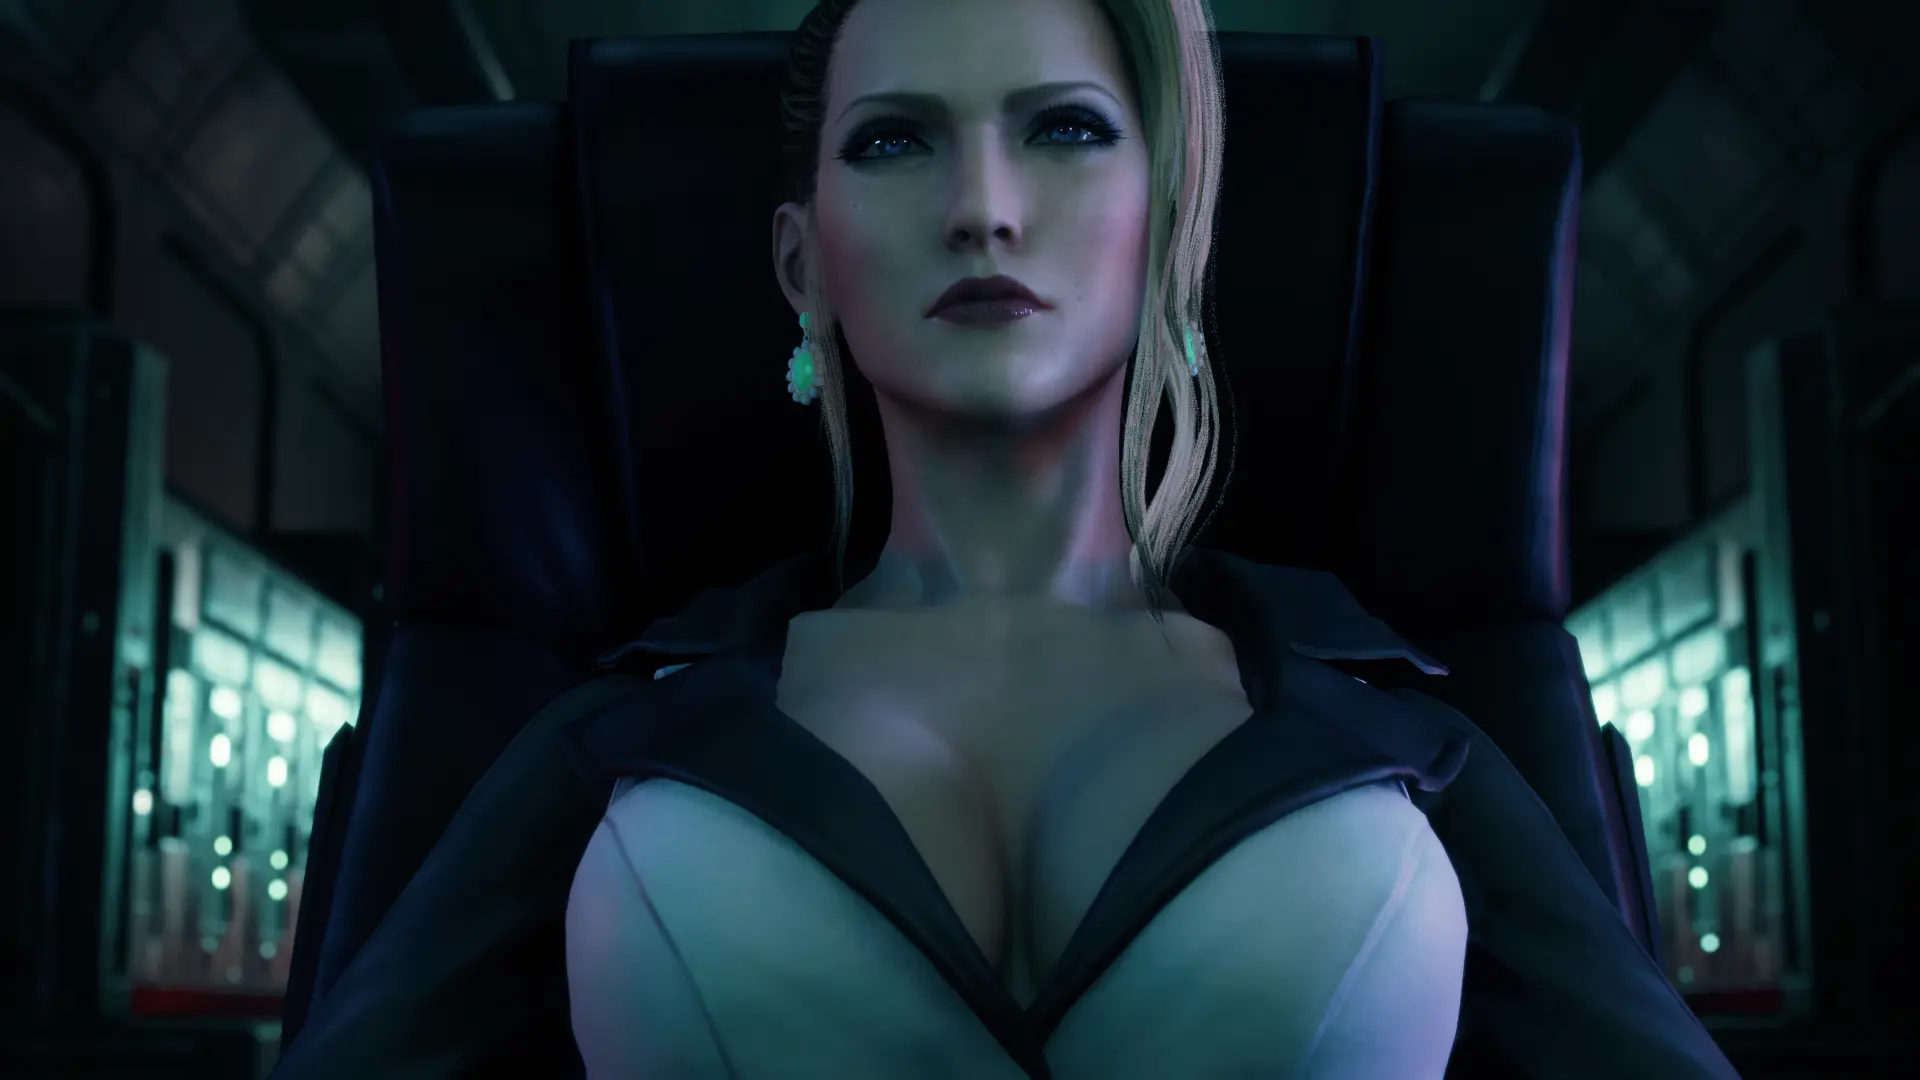 Scarlet As Mature At Final Fantasy Vii Remake Nexus Mods And Community